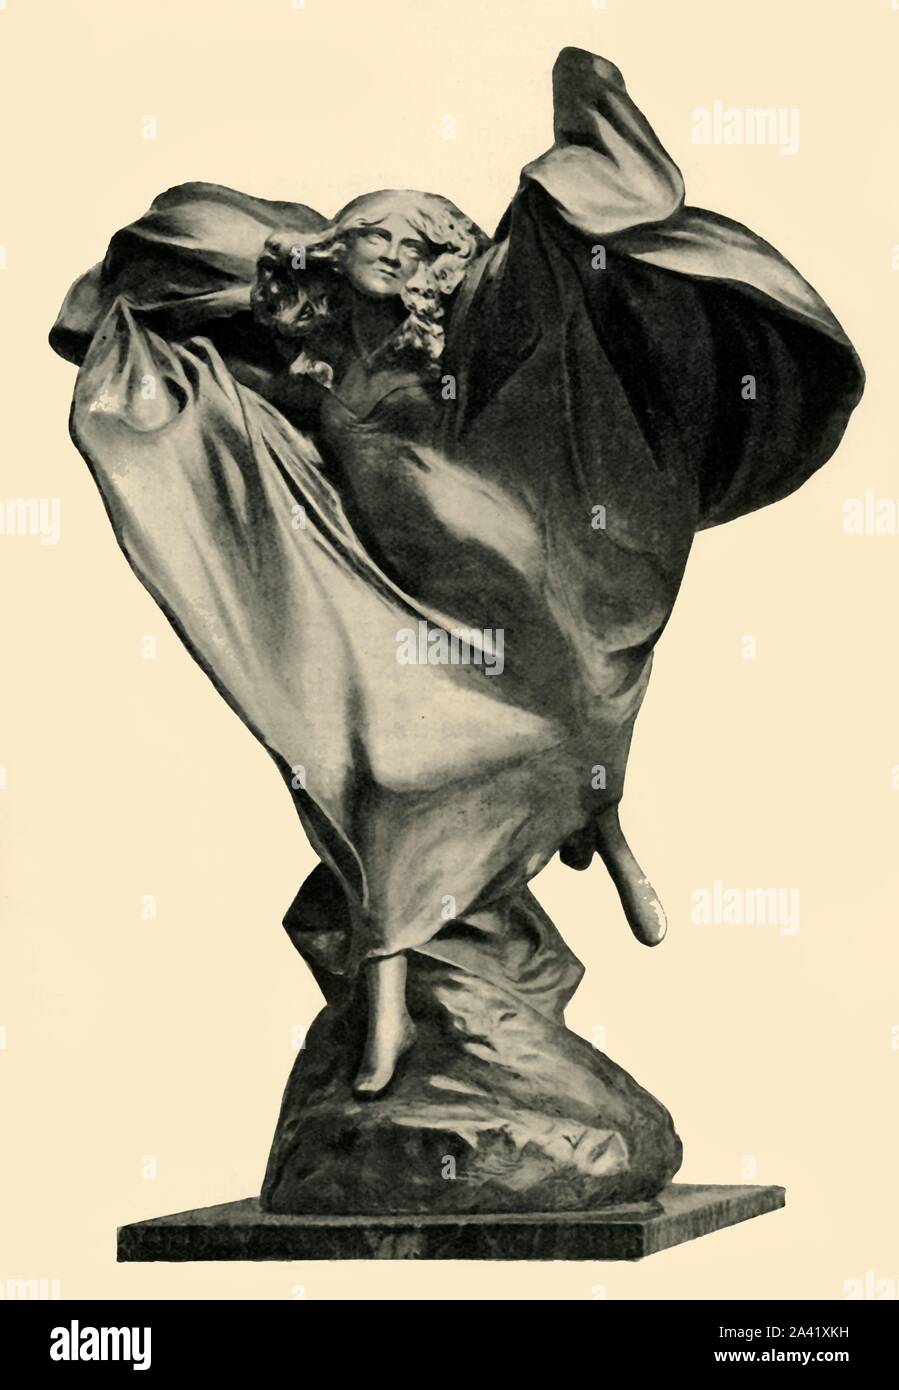 Statue of Lo&#xef;e Fuller by Th&#xe9;odore Rivi&#xe8;re, c1890s, (1903). Loie Fuller (1862-1928) was an American dancer who pioneered modern dance and theatrical lighing techniques. Fuller performed at the Folies-Berg&#xe8;re in Paris in 1892. Her act was a huge success; she swirled long drapes around herself, extending her reach with poles, while being lit in kaleidoscopic colours and by spotlights. The flowing lines and glowing colours of her dance have been credited as an influence on Art Nouveau, and many prints and small bronzes were made of her dance. She described herself as a 'sculpto Stock Photo